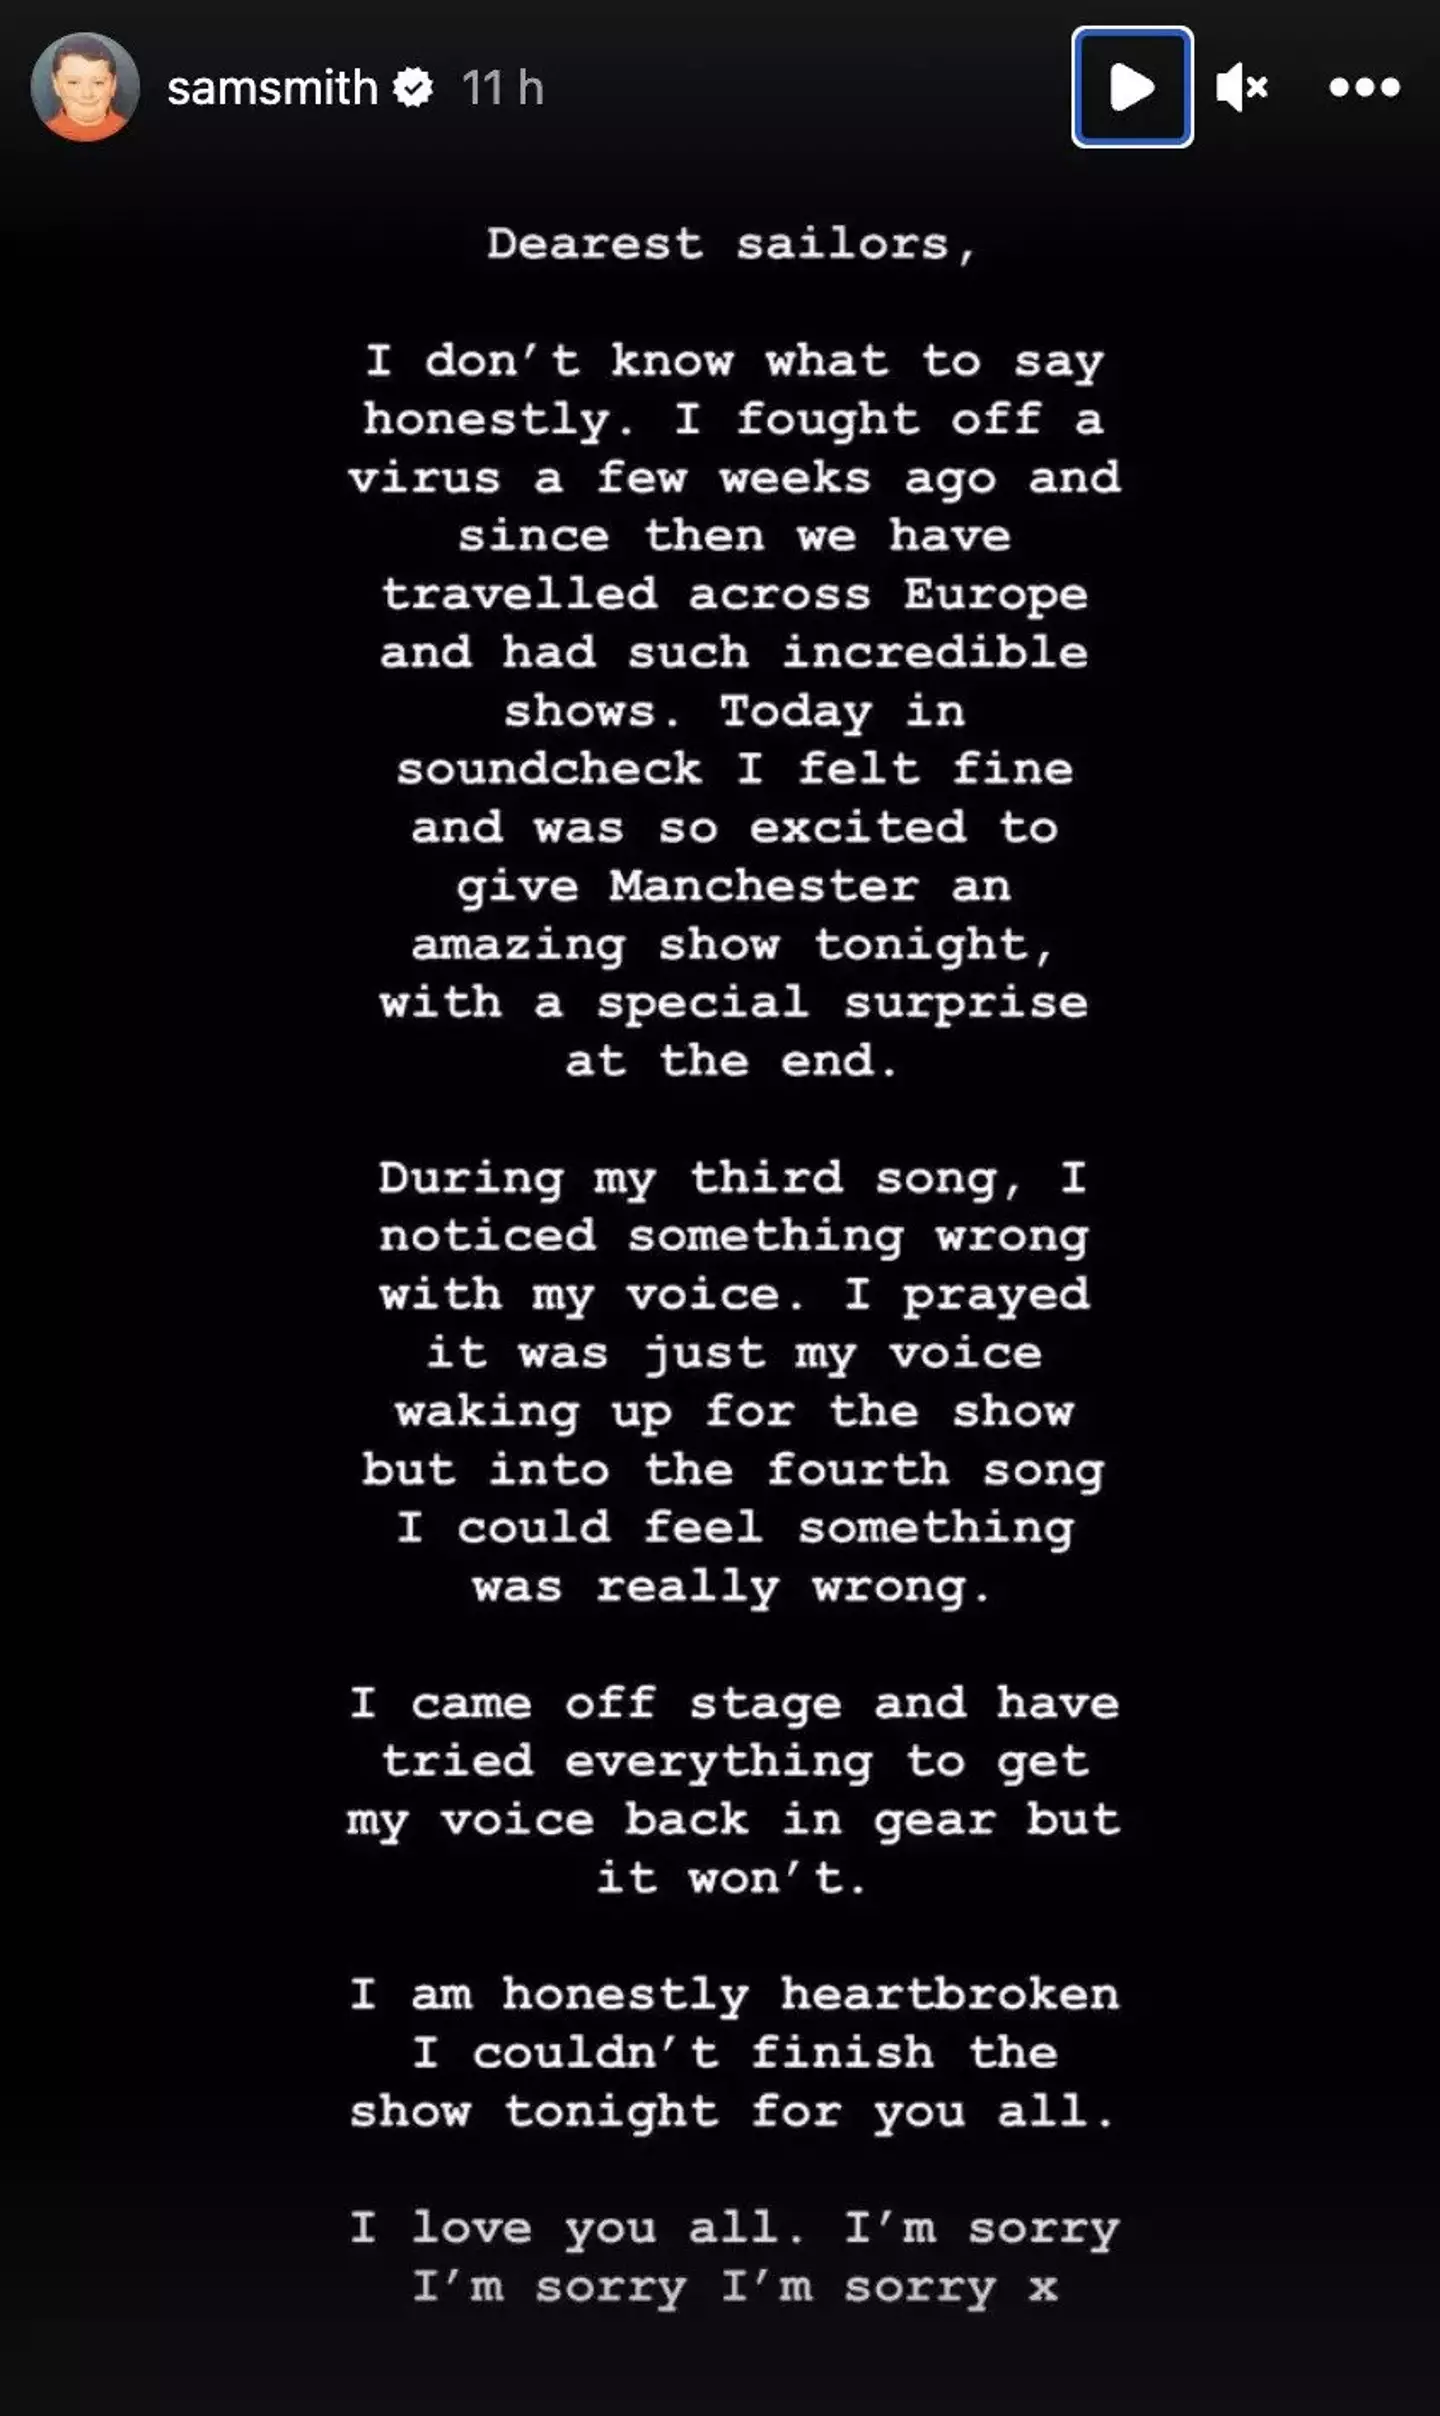 Sam issued an apology to fans on Instagram.